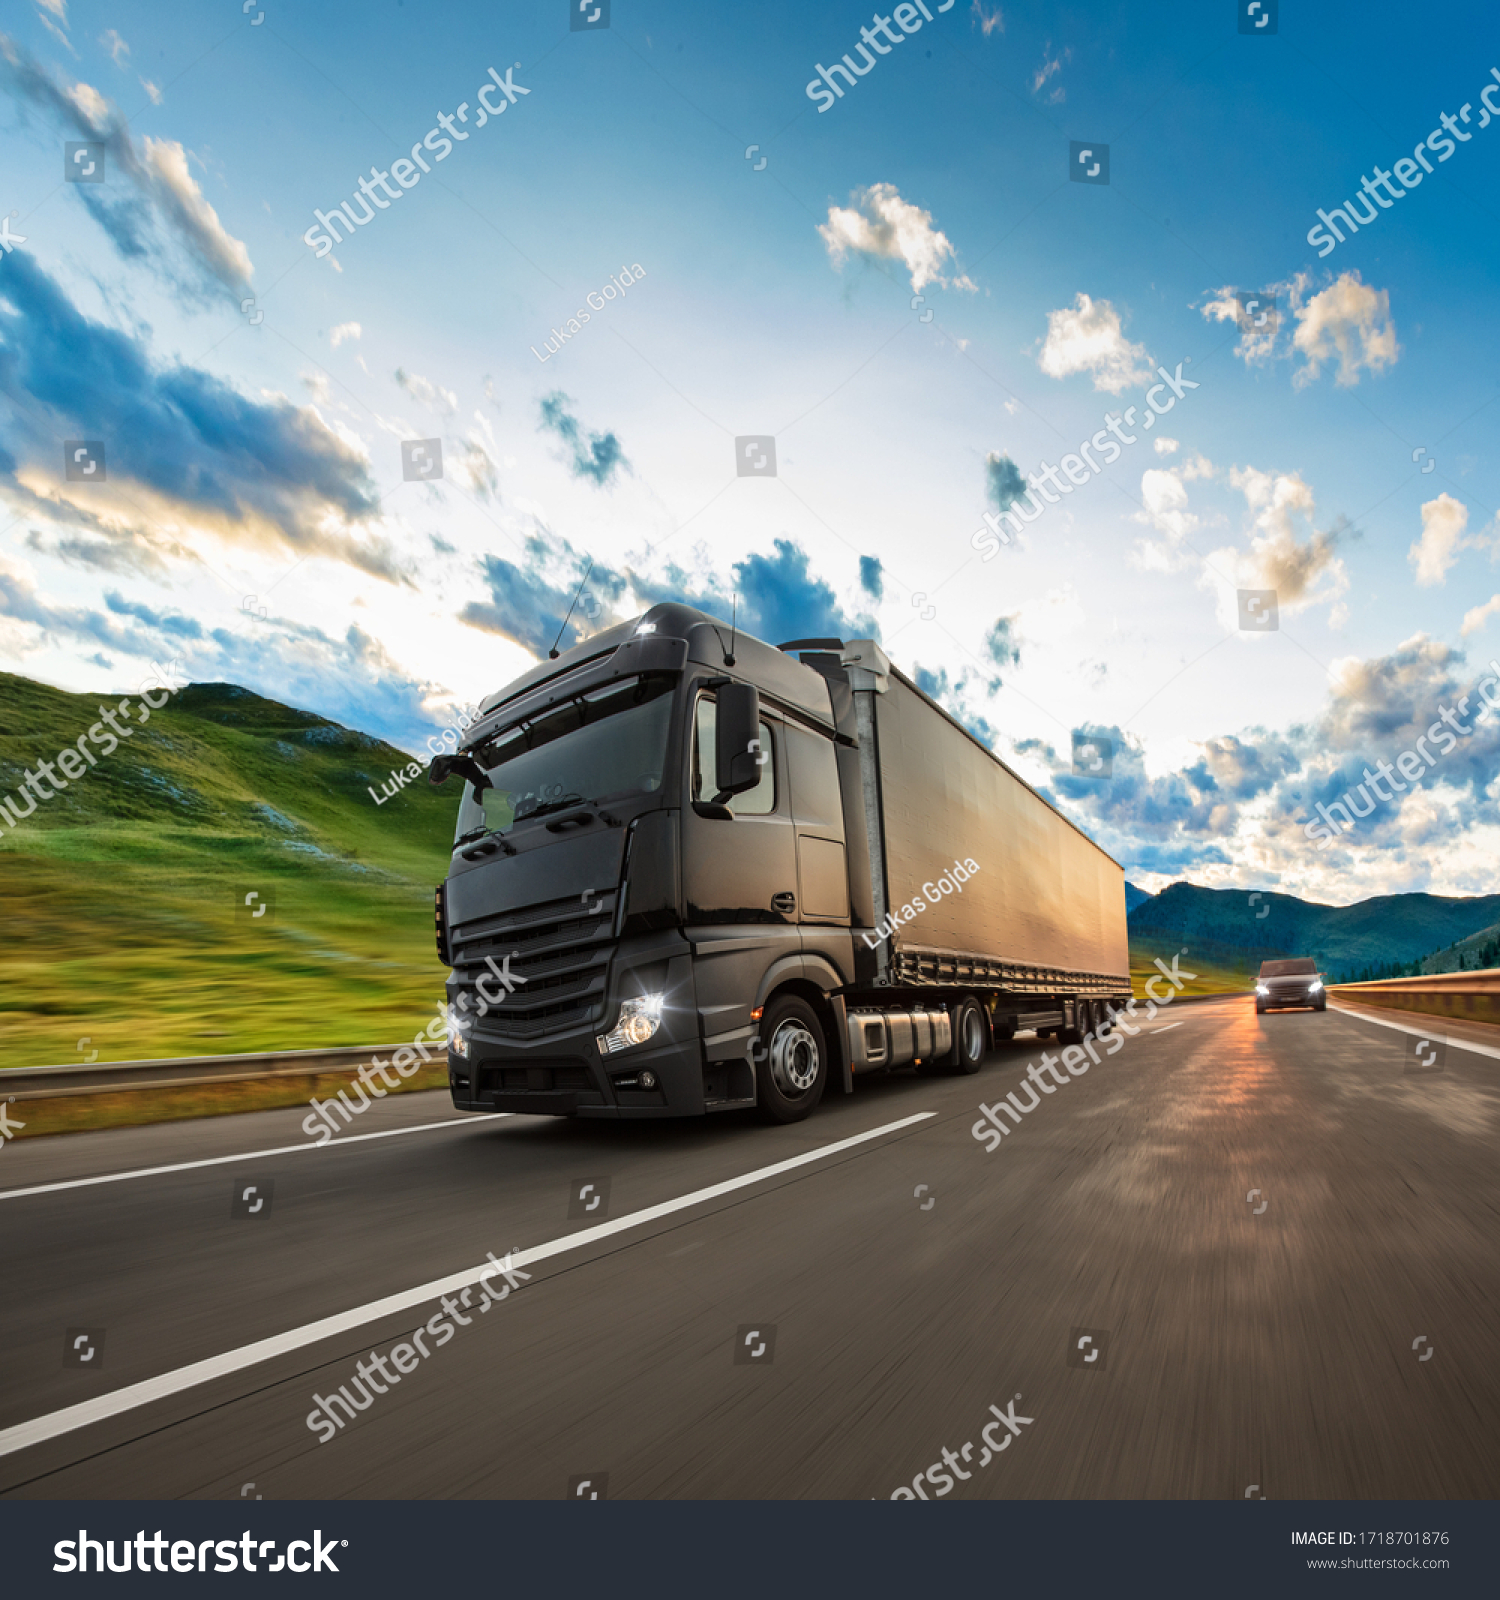 Truck with container on highway, cargo transportation concept. Shaving effect. #1718701876